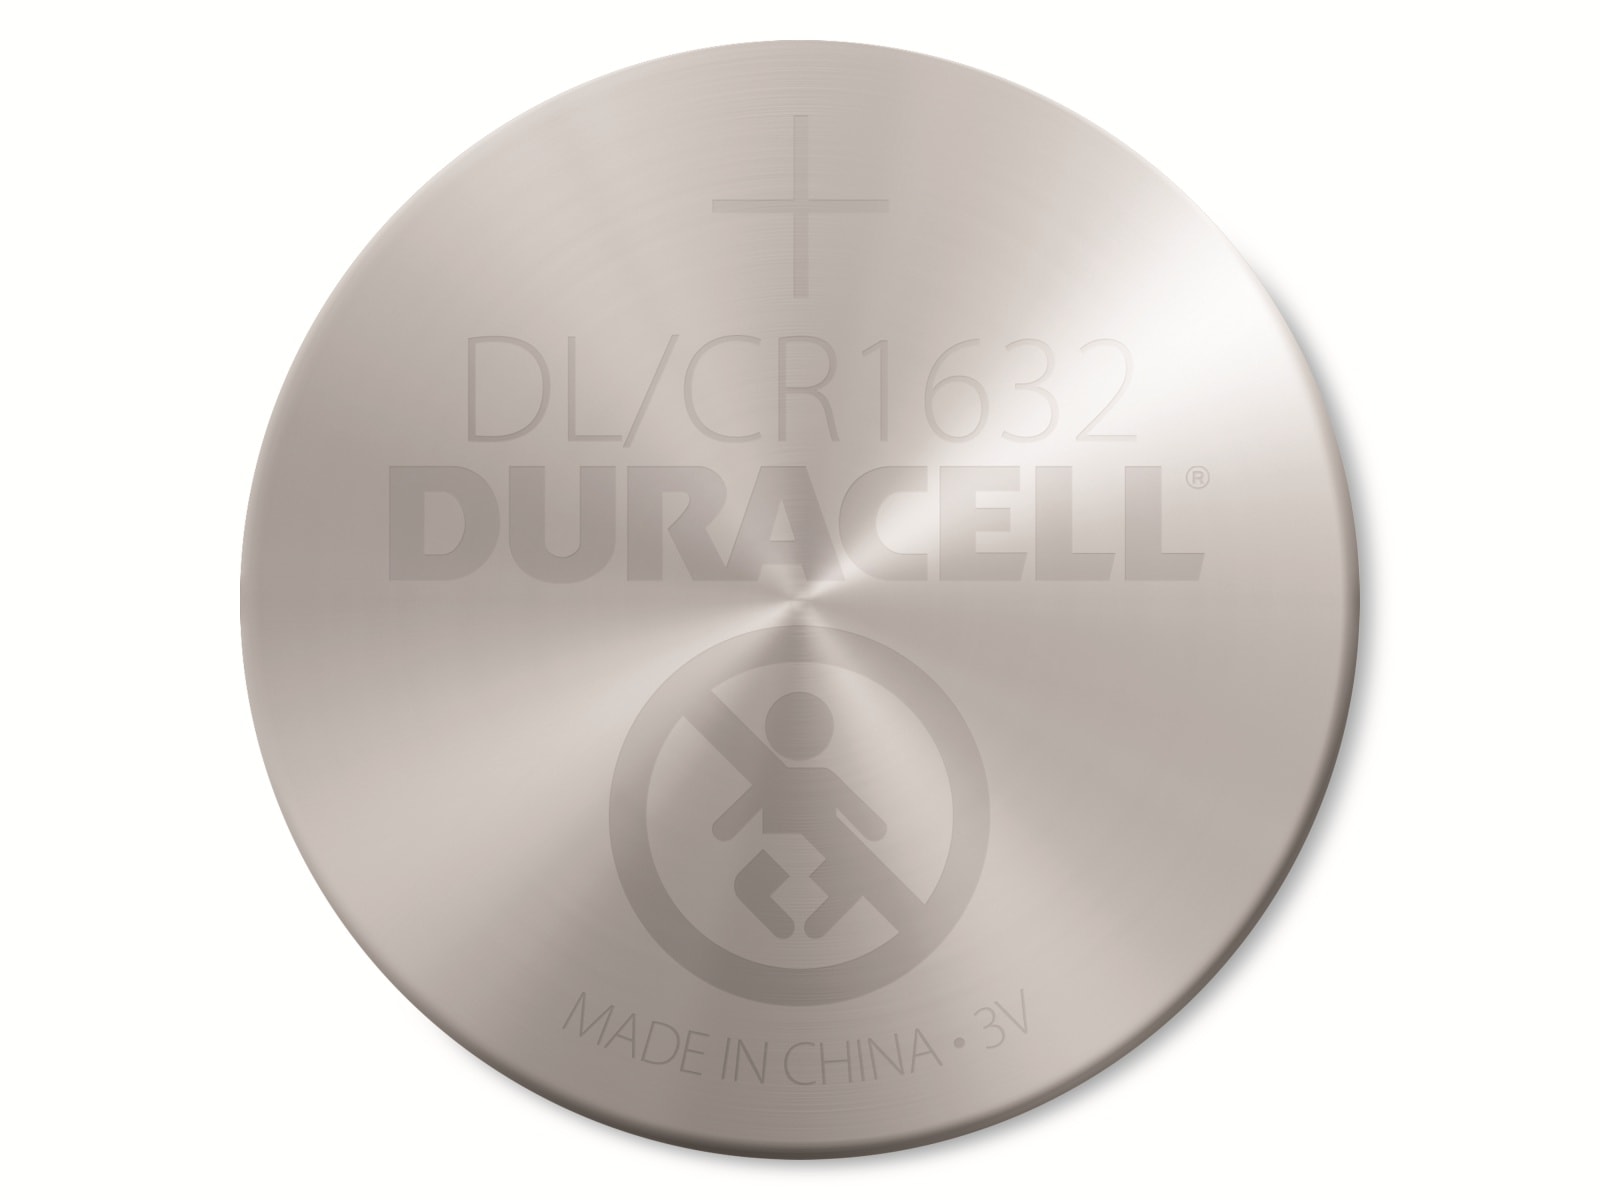 DURACELL Lithium-Knopfzelle CR1632, 3V, Electronics